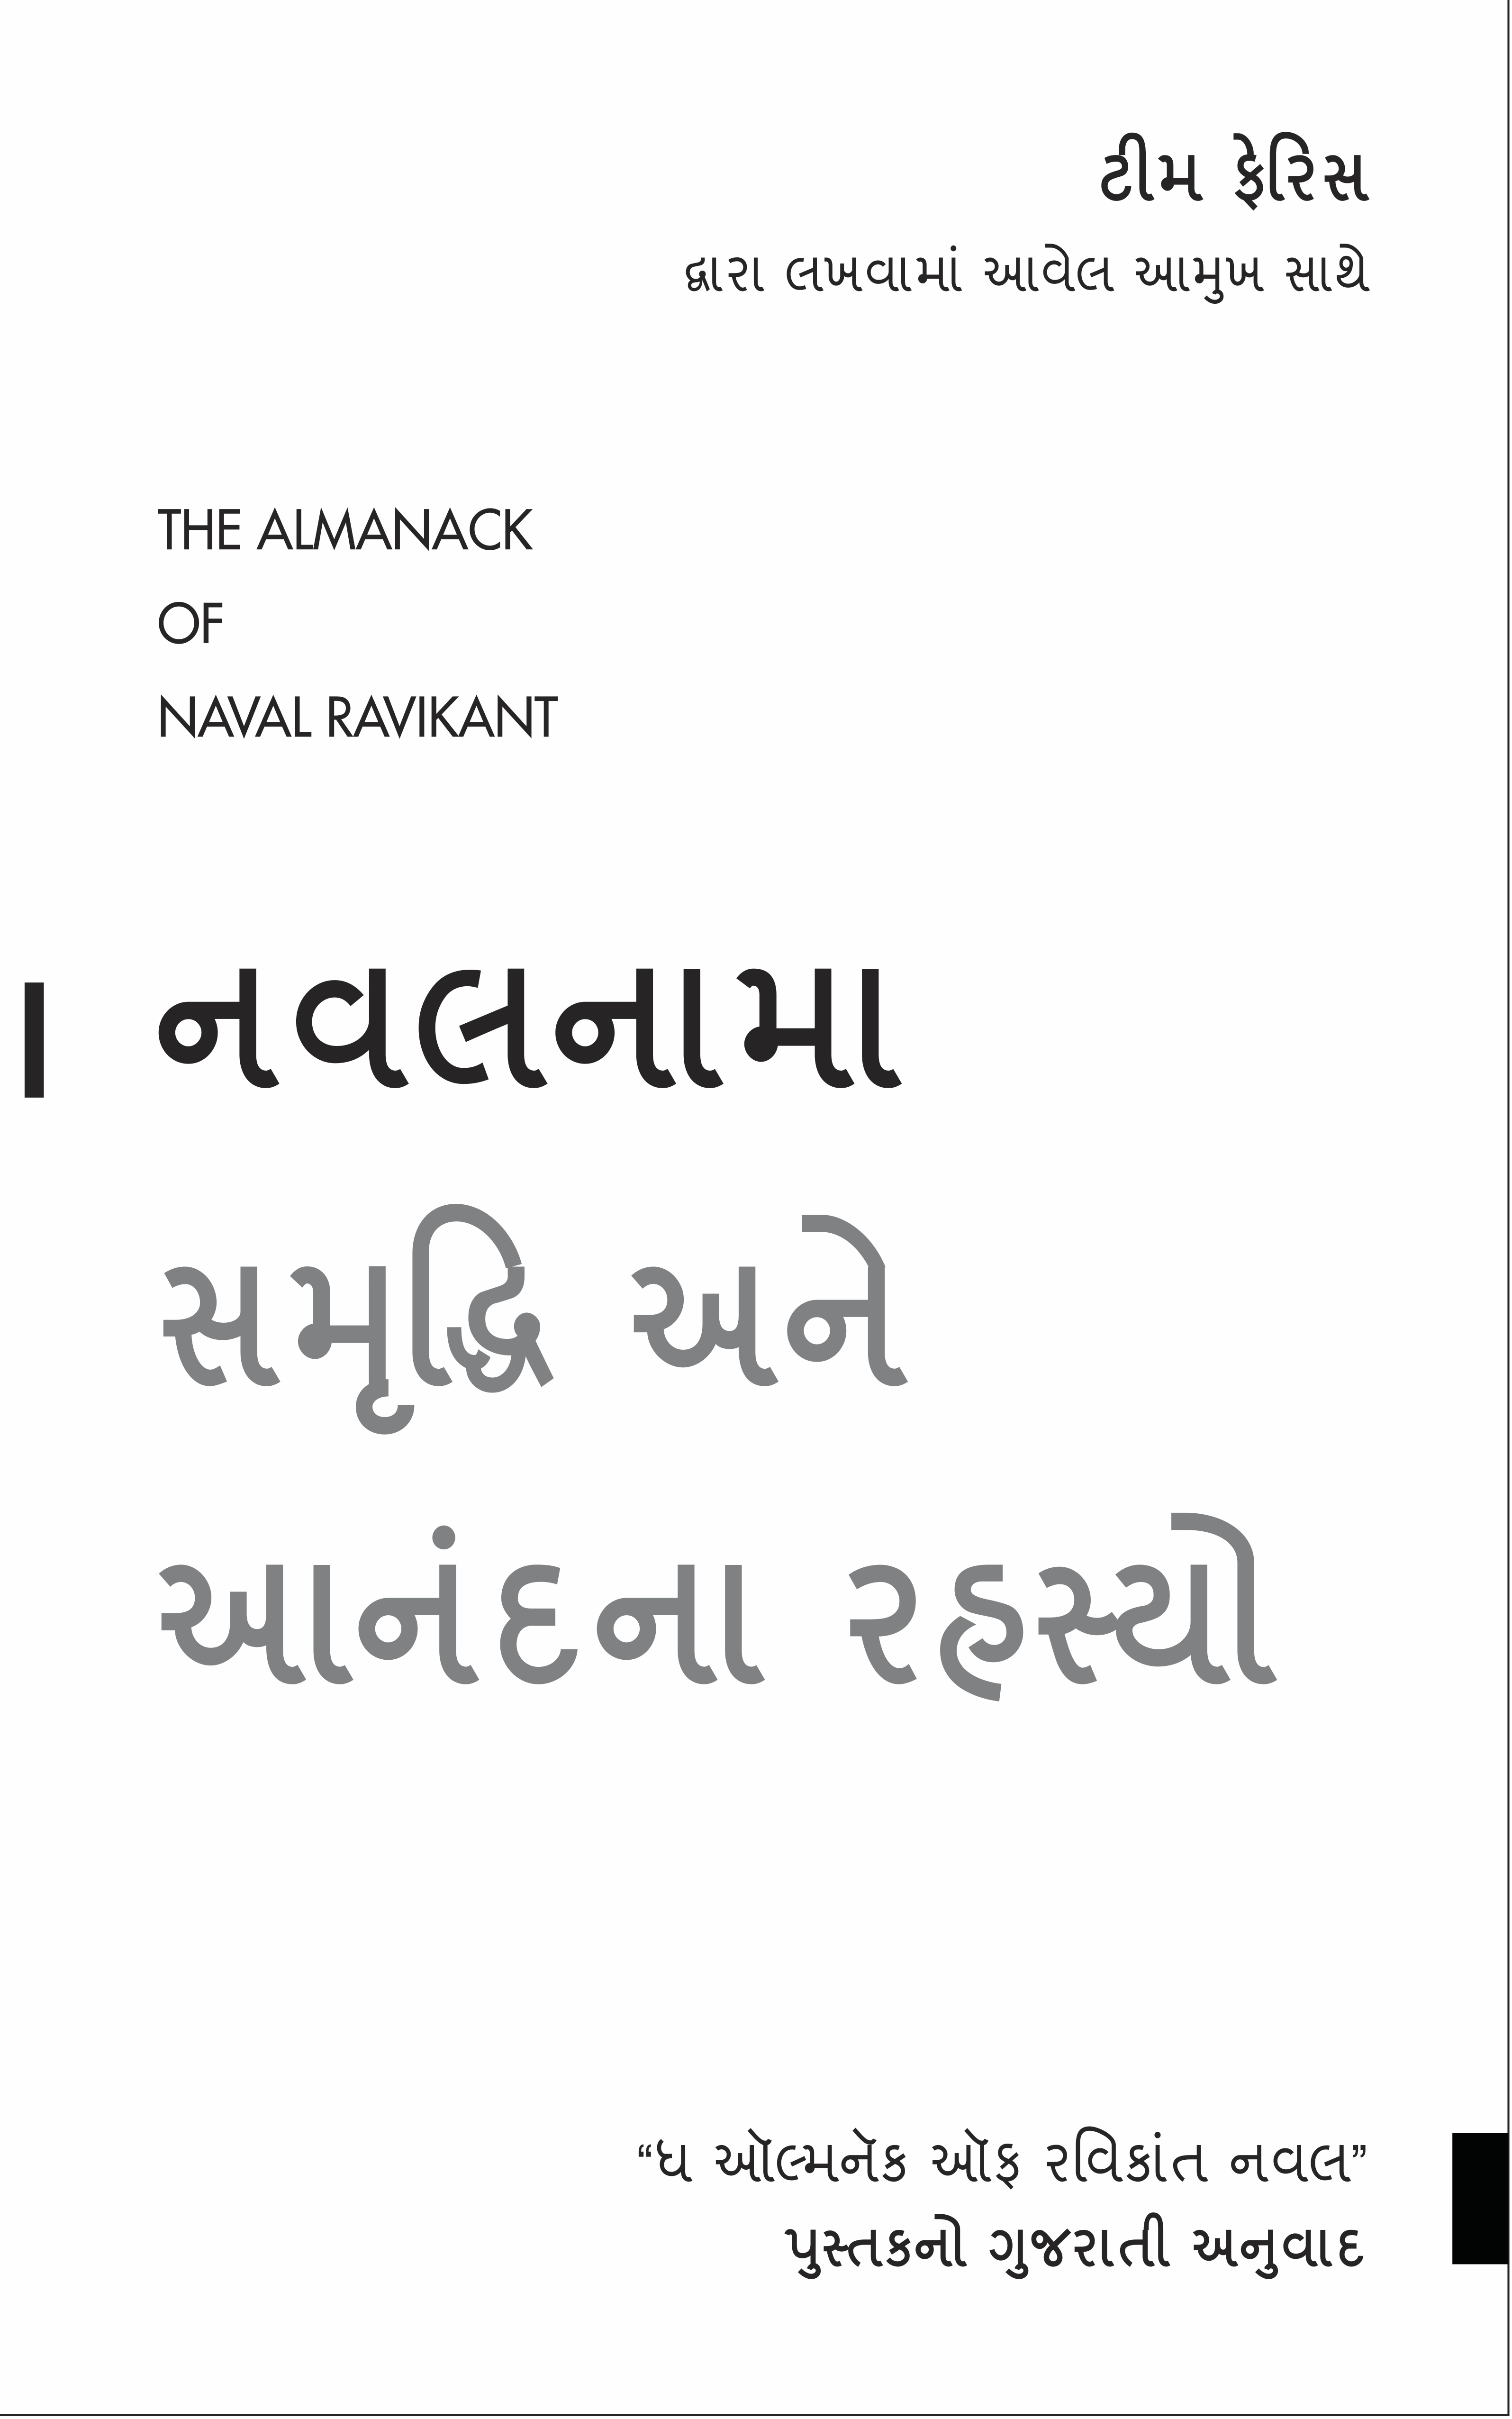 Quick Review: The Almanack of Naval Ravikant